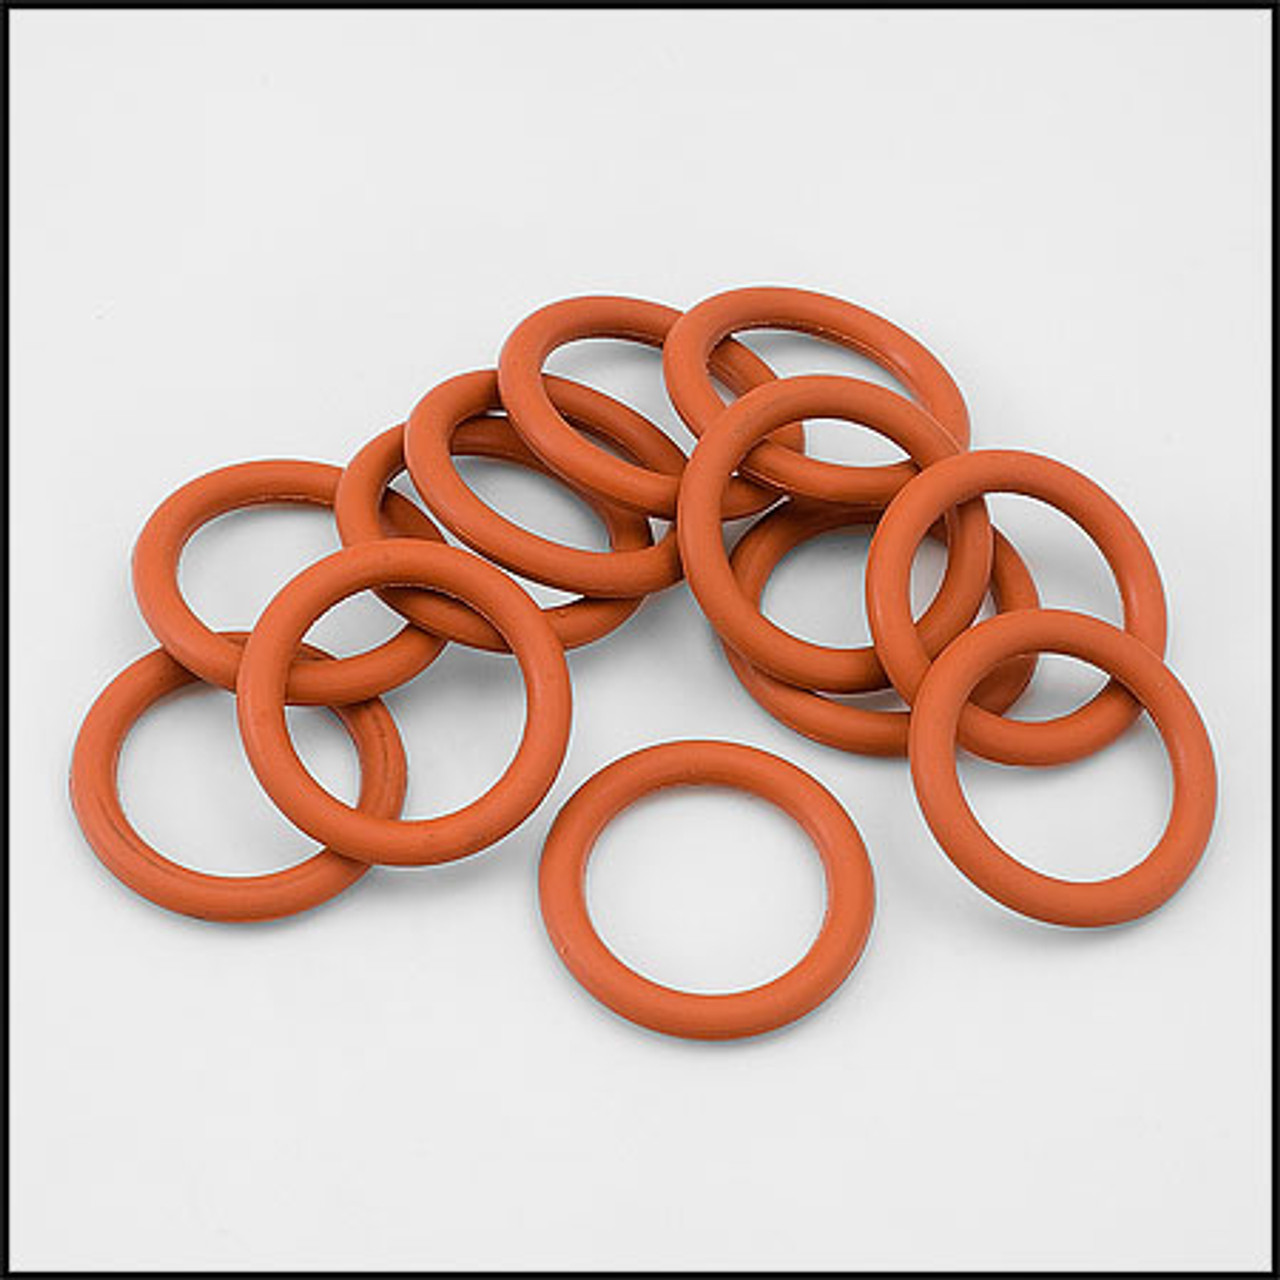 Zodiac/Jandy Laars Tube Gasket O-Ring End Cap For Oil Heaters (Set Of 12) (#R0391600)